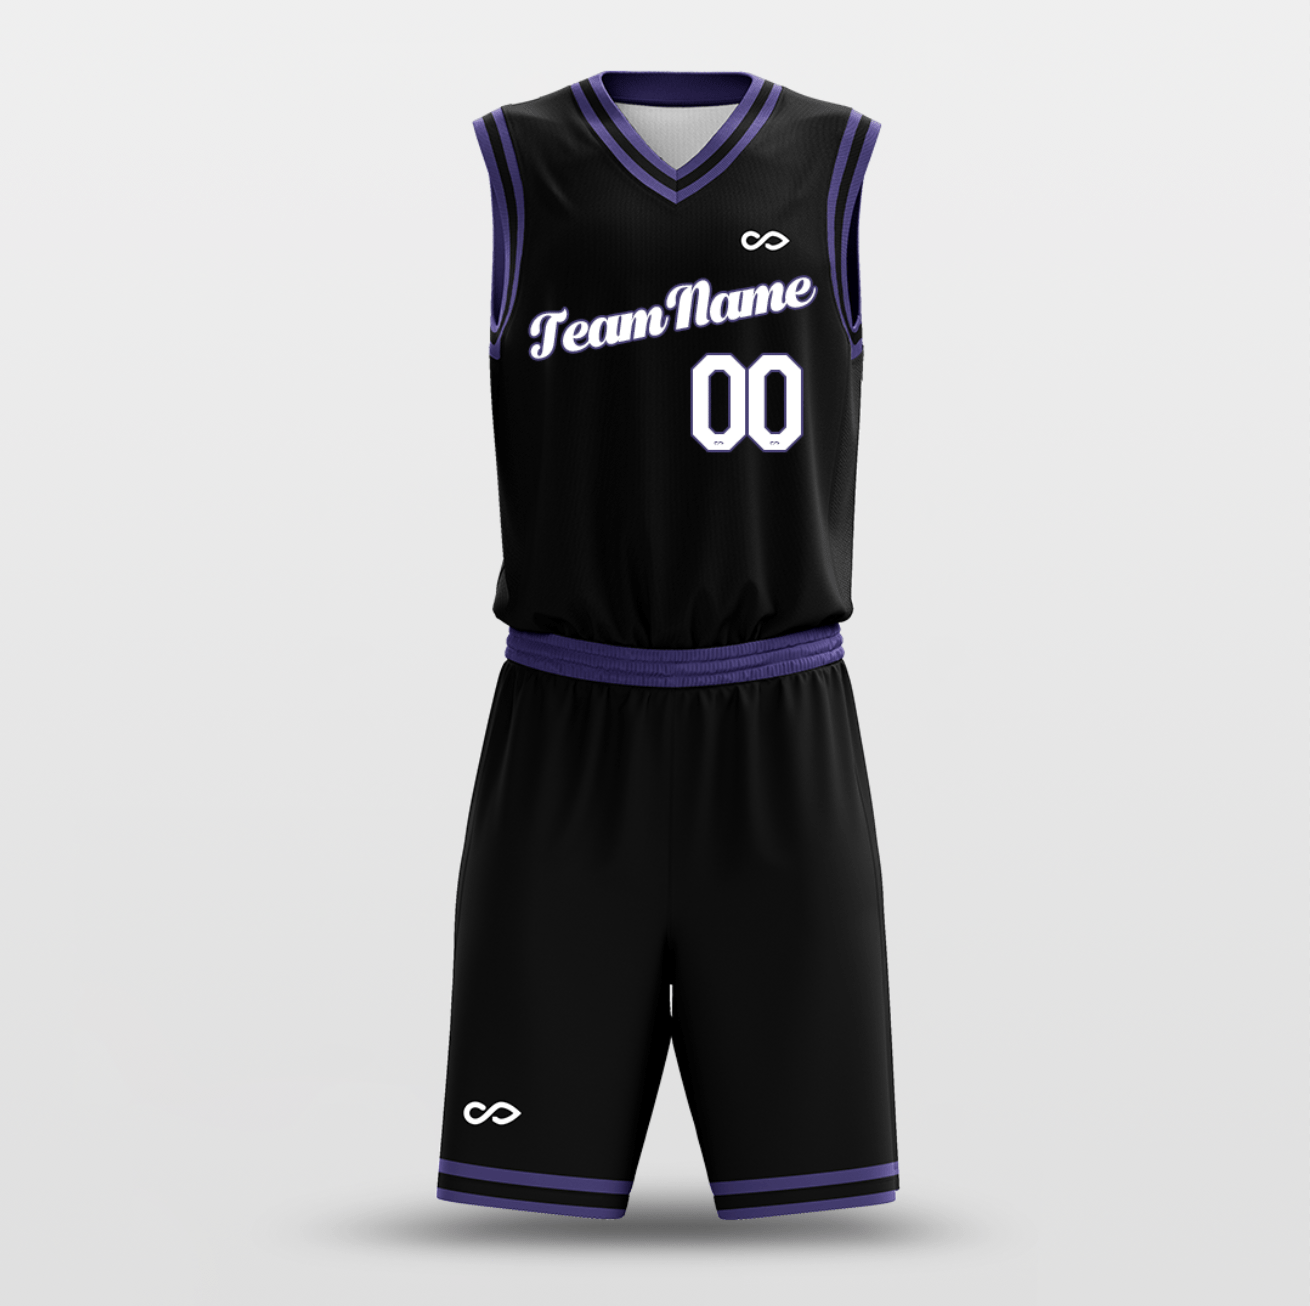 Custom Basketball Jersey - Make Your Own Name Team Logo for Basketball  Costume Personalized Basketball Jersey Purple (Purple)